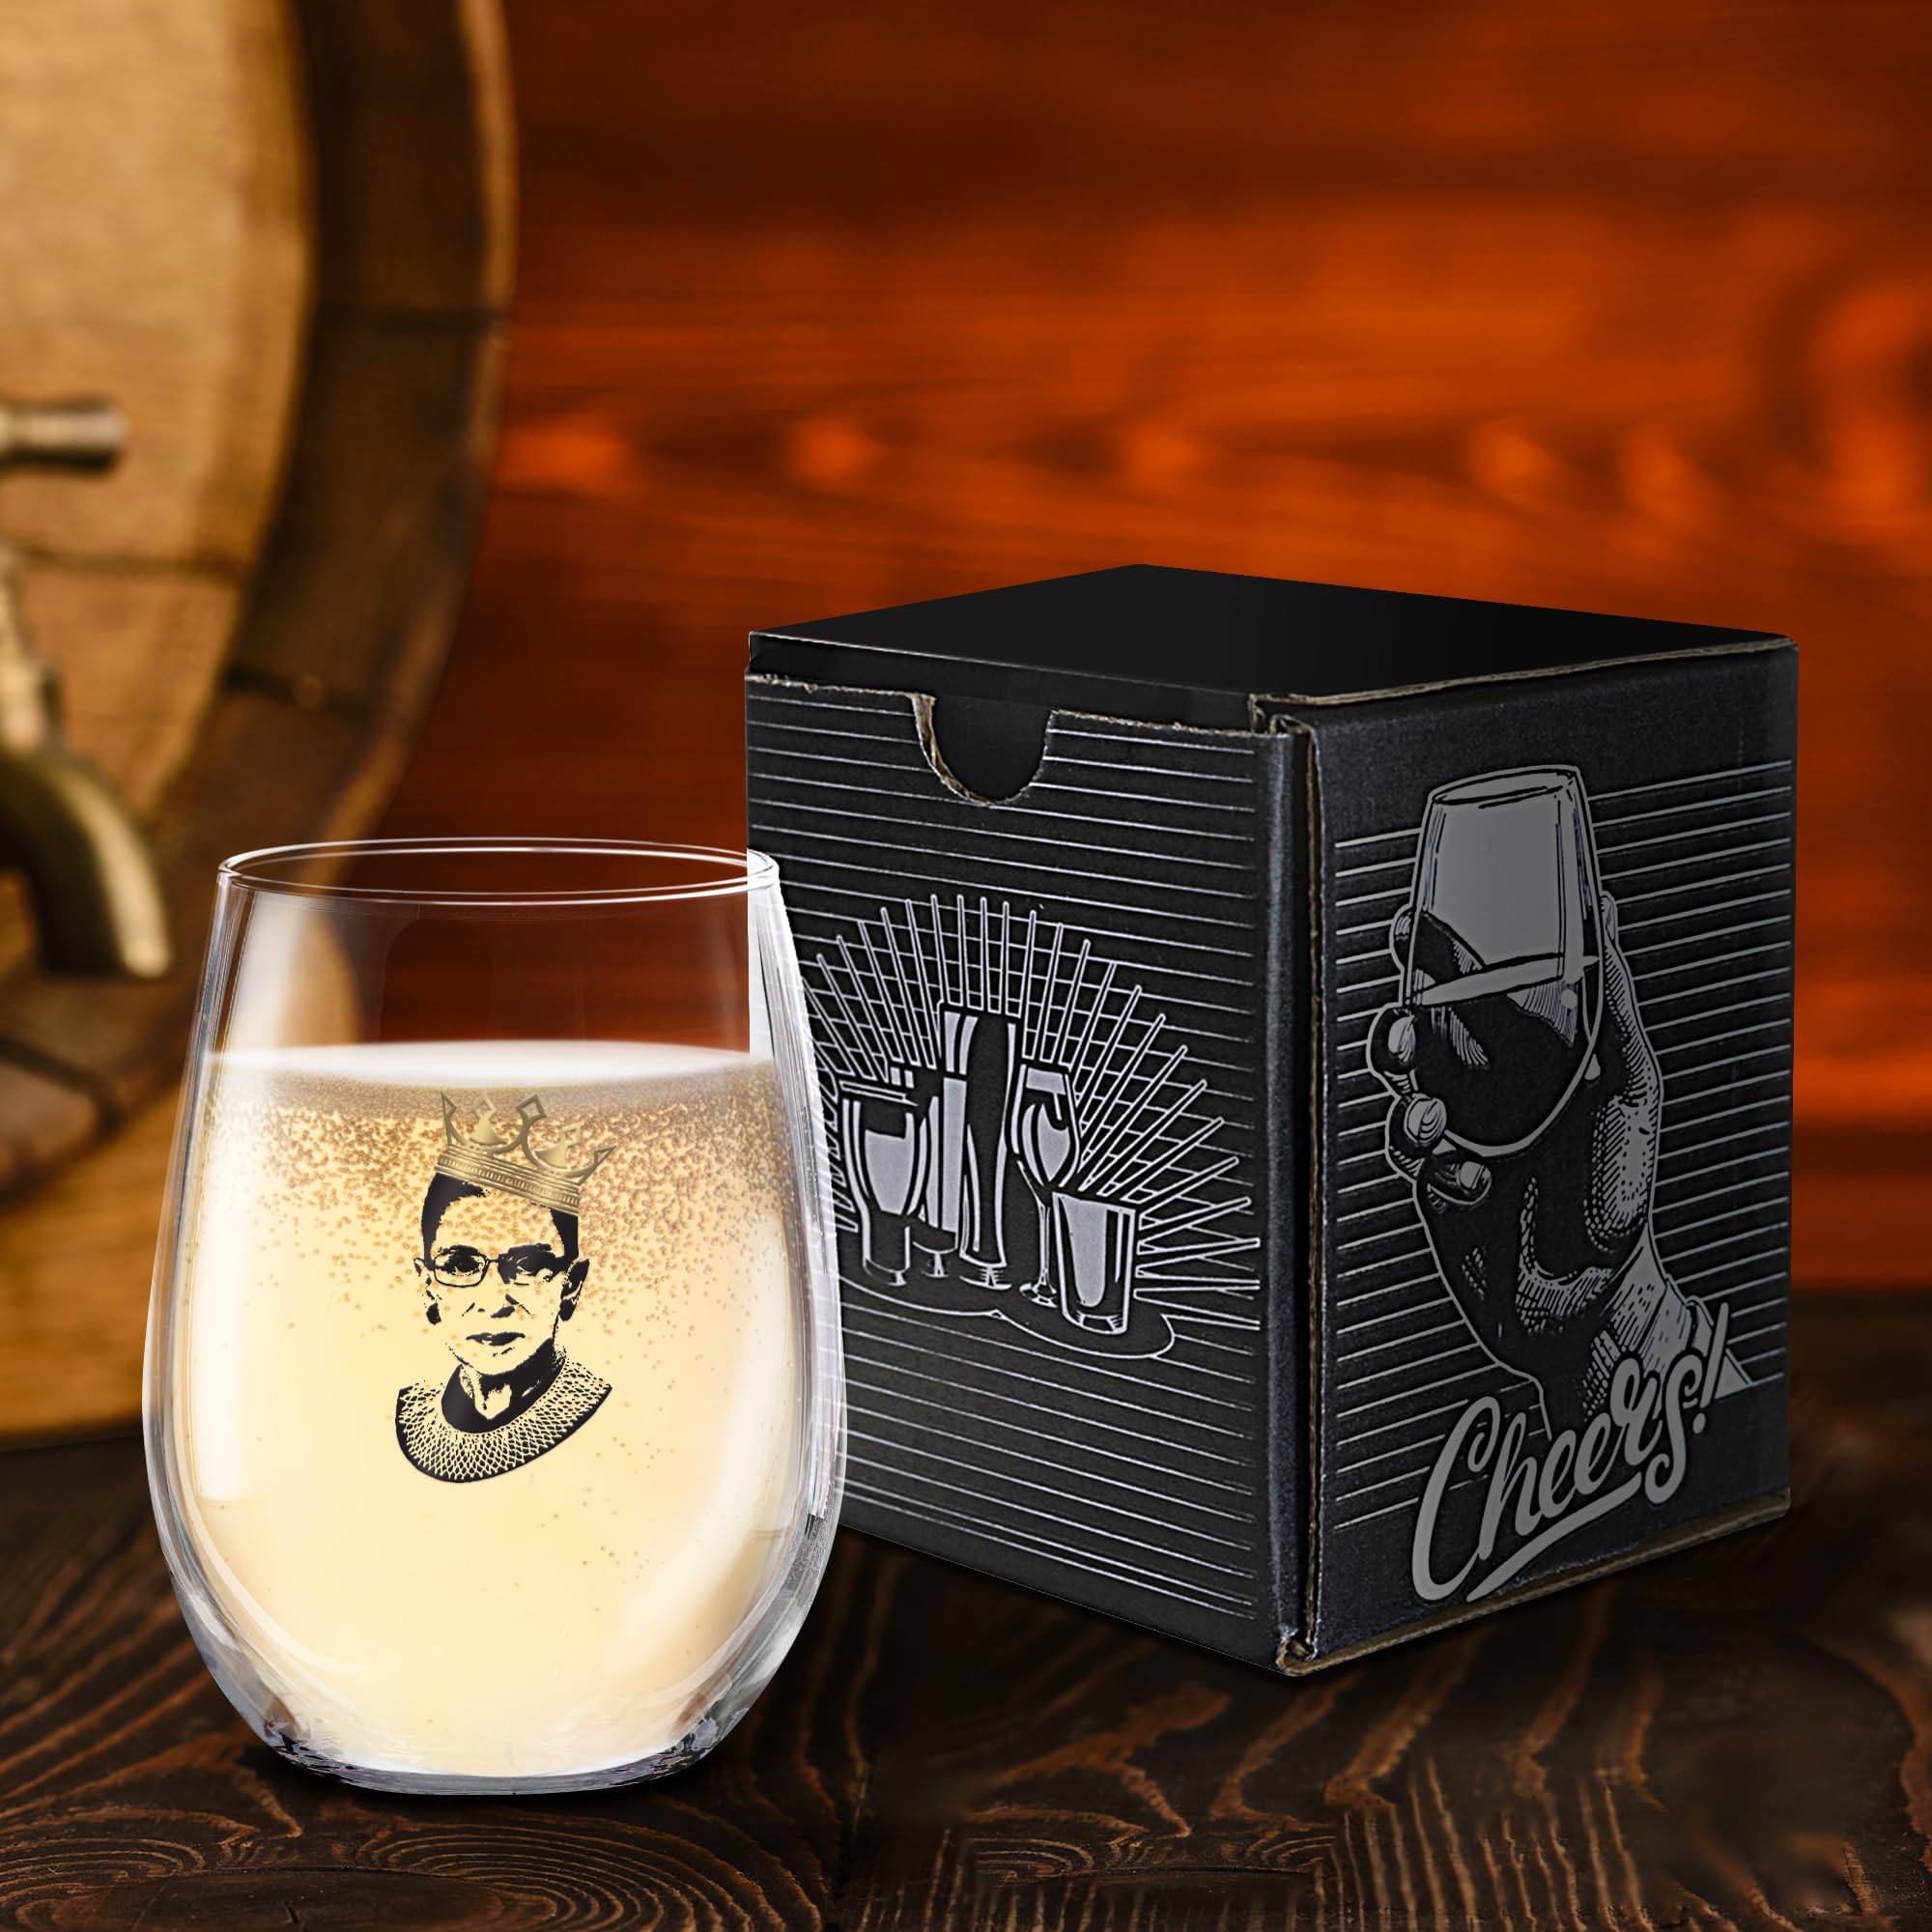 Majority Blue - Ruth Bader Ginsburg - RBG Wine Glasses | Gifts for Feminist | RBG Wine Glass Gifts for Women | Gift for Her | RBG Crown | Ginsburg Lawyer Glass | Justice Glassware Collection (15 oz)